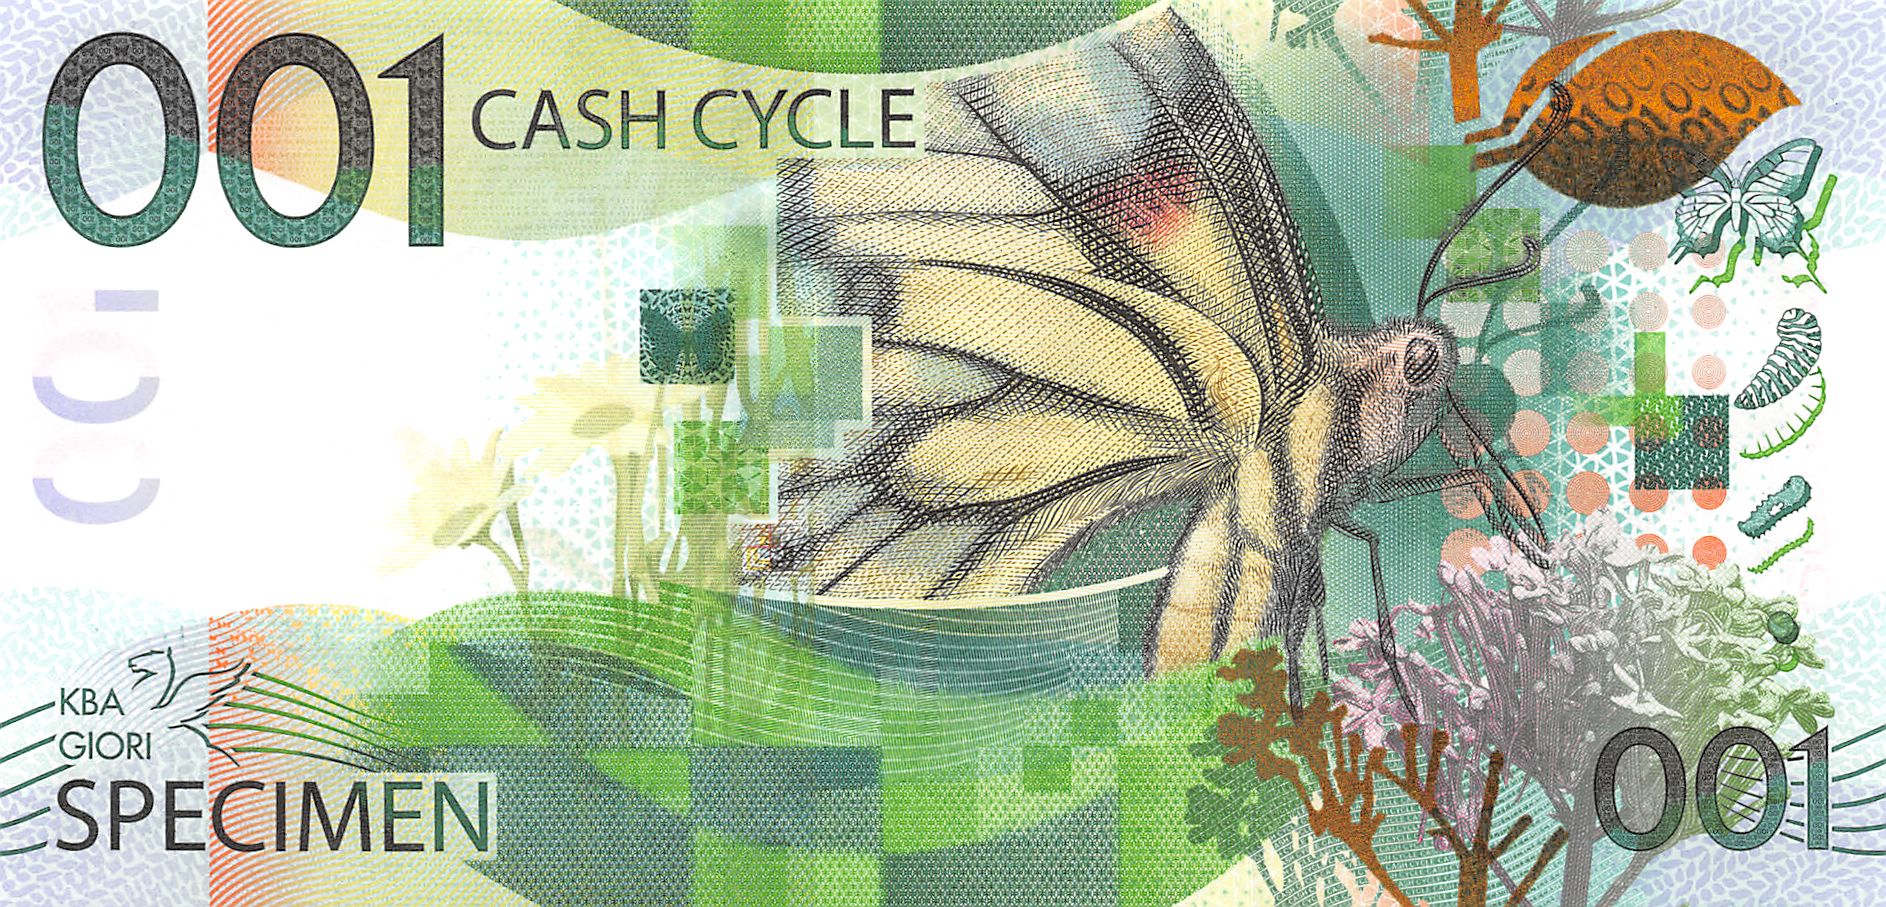 001 Cash Cycle KBA-GIORI Test note / Specimen Stunning Butterfly